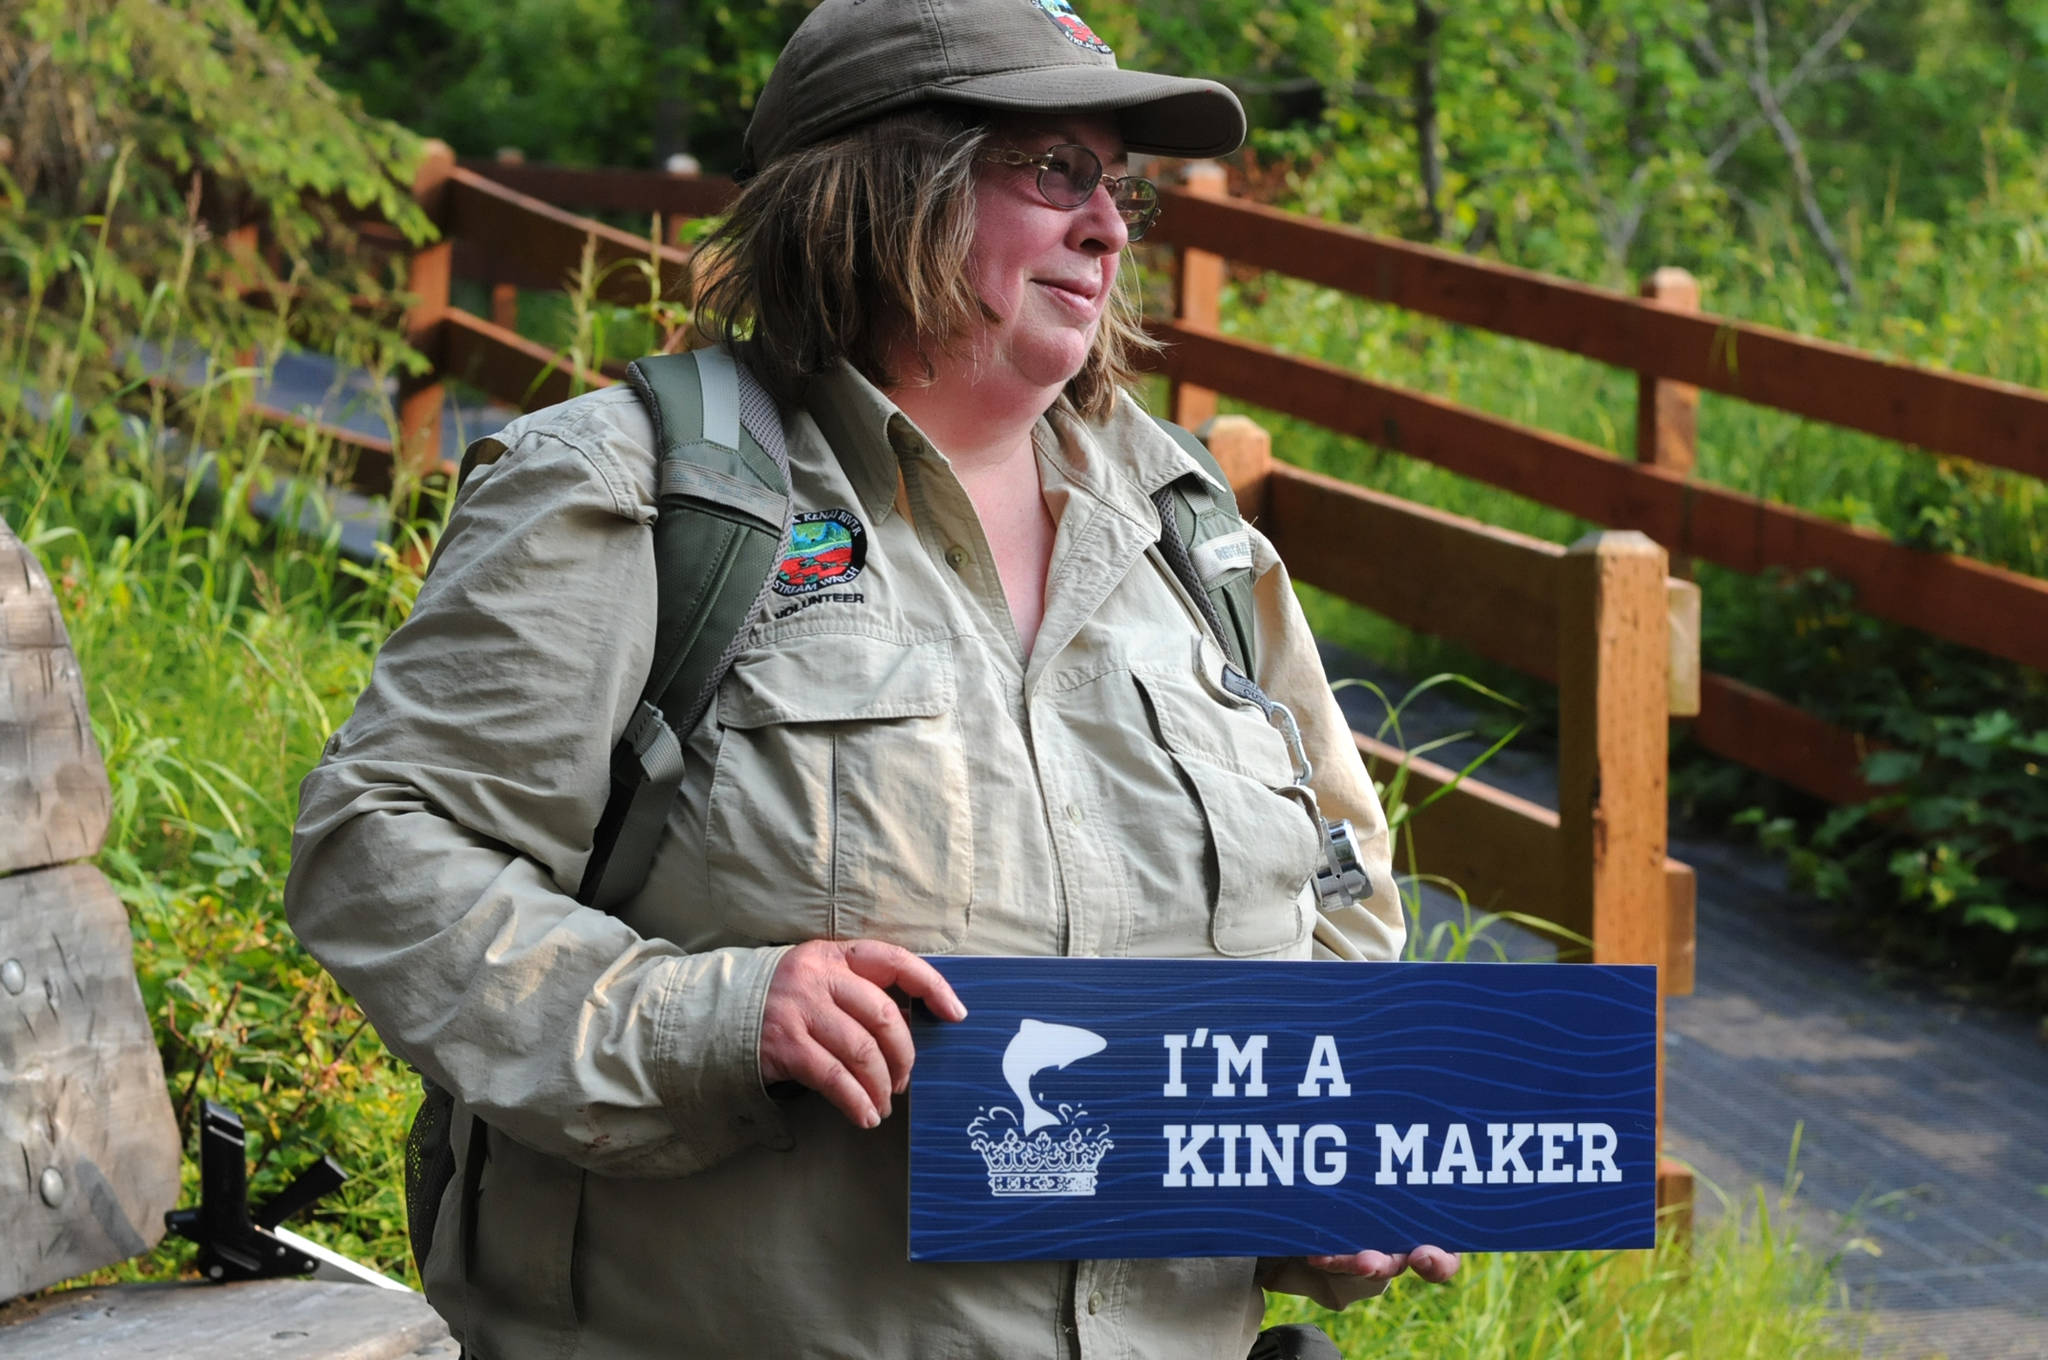 Kathy Heindle, a Kenai Peninsula Stream Watch volunteer, holds a sign designating her as a winner of the Kingmaker Award from the Kachemak Heritage Land Trust in Centennial Park on Thursday, July 13, 2017 in Soldotna, Alaska. Heindle, who has been volunteering with Stream Watch since 2011, received a “Kingmaker” award from the Kachemak Heritage Land Trust for her work protecting the Kenai River watershed. (Photo by Elizabeth Earl/Peninsula Clarion) Kathy Heindle, a Kenai Peninsula Stream Watch volunteer, holds a sign designating her as a winner of the Kingmaker Award from the Kachemak Heritage Land Trust in Centennial Park on Thursday, July 13, 2017 in Soldotna, Alaska. Heindle, who has been volunteering with Stream Watch since 2011, received a “Kingmaker” award from the Kachemak Heritage Land Trust for her work protecting the Kenai River watershed. (Photo by Elizabeth Earl/Peninsula Clarion)